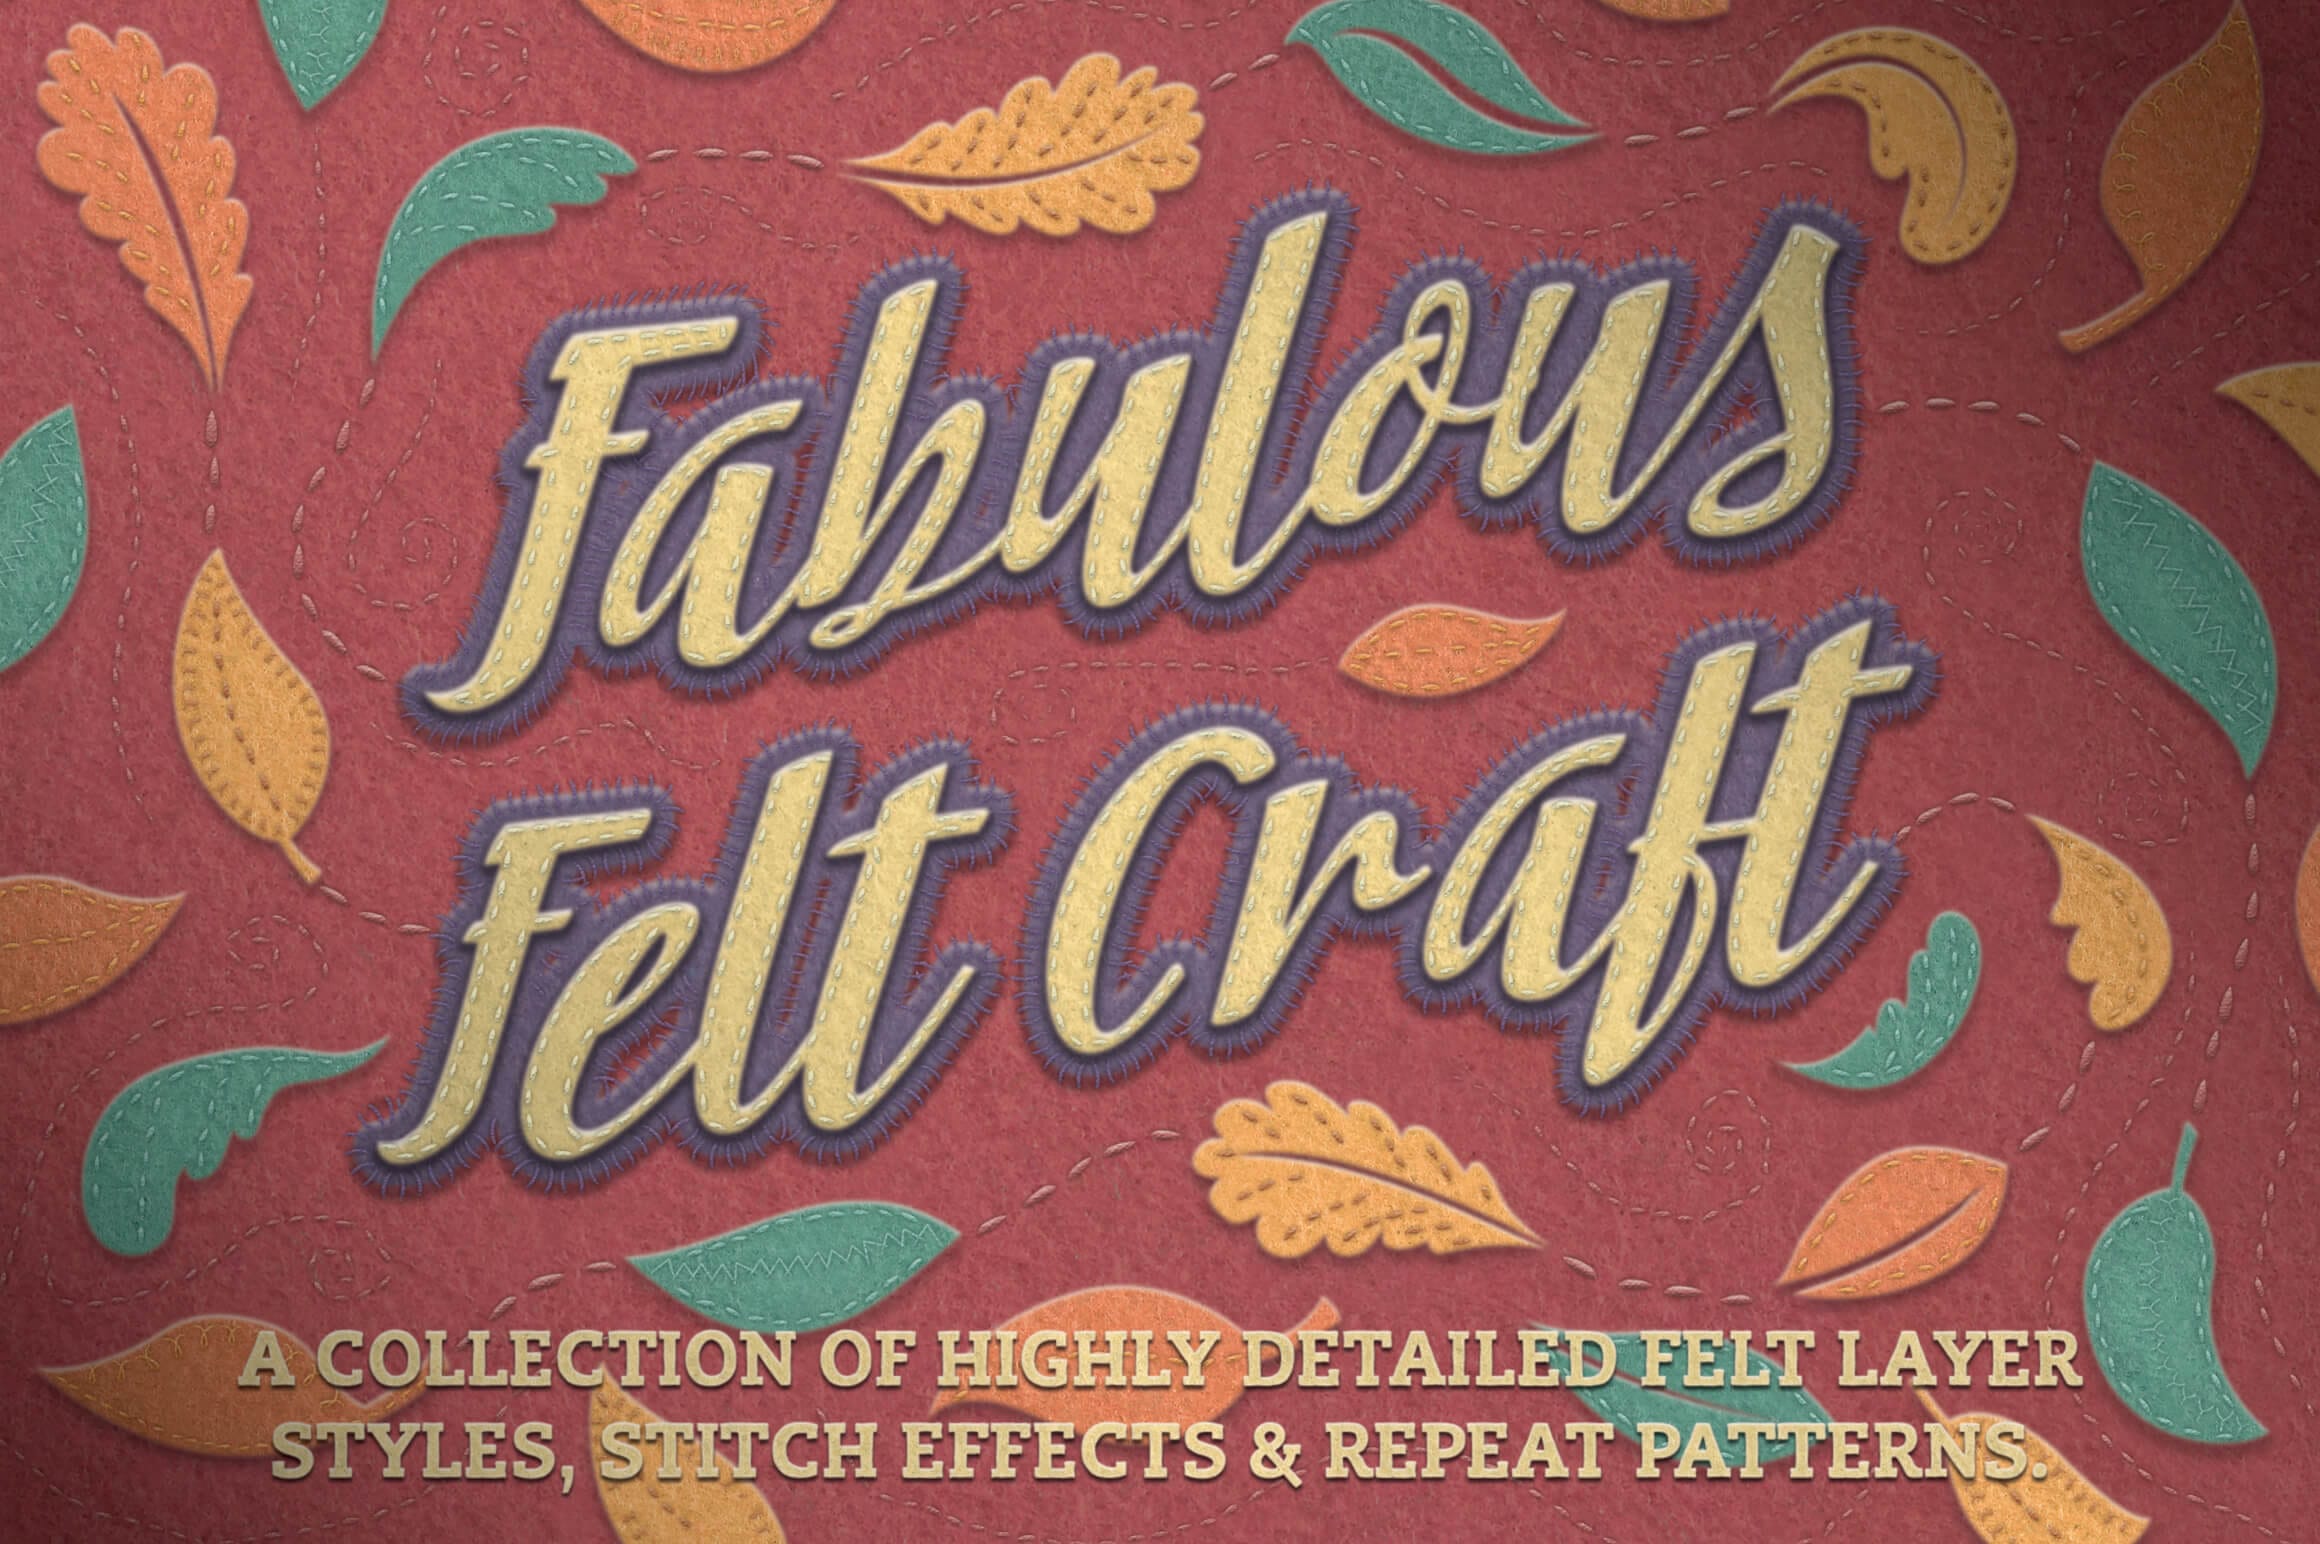 A Collection of 32 Photoshop Felt Styles & 10 Stitch Effects – only $7!